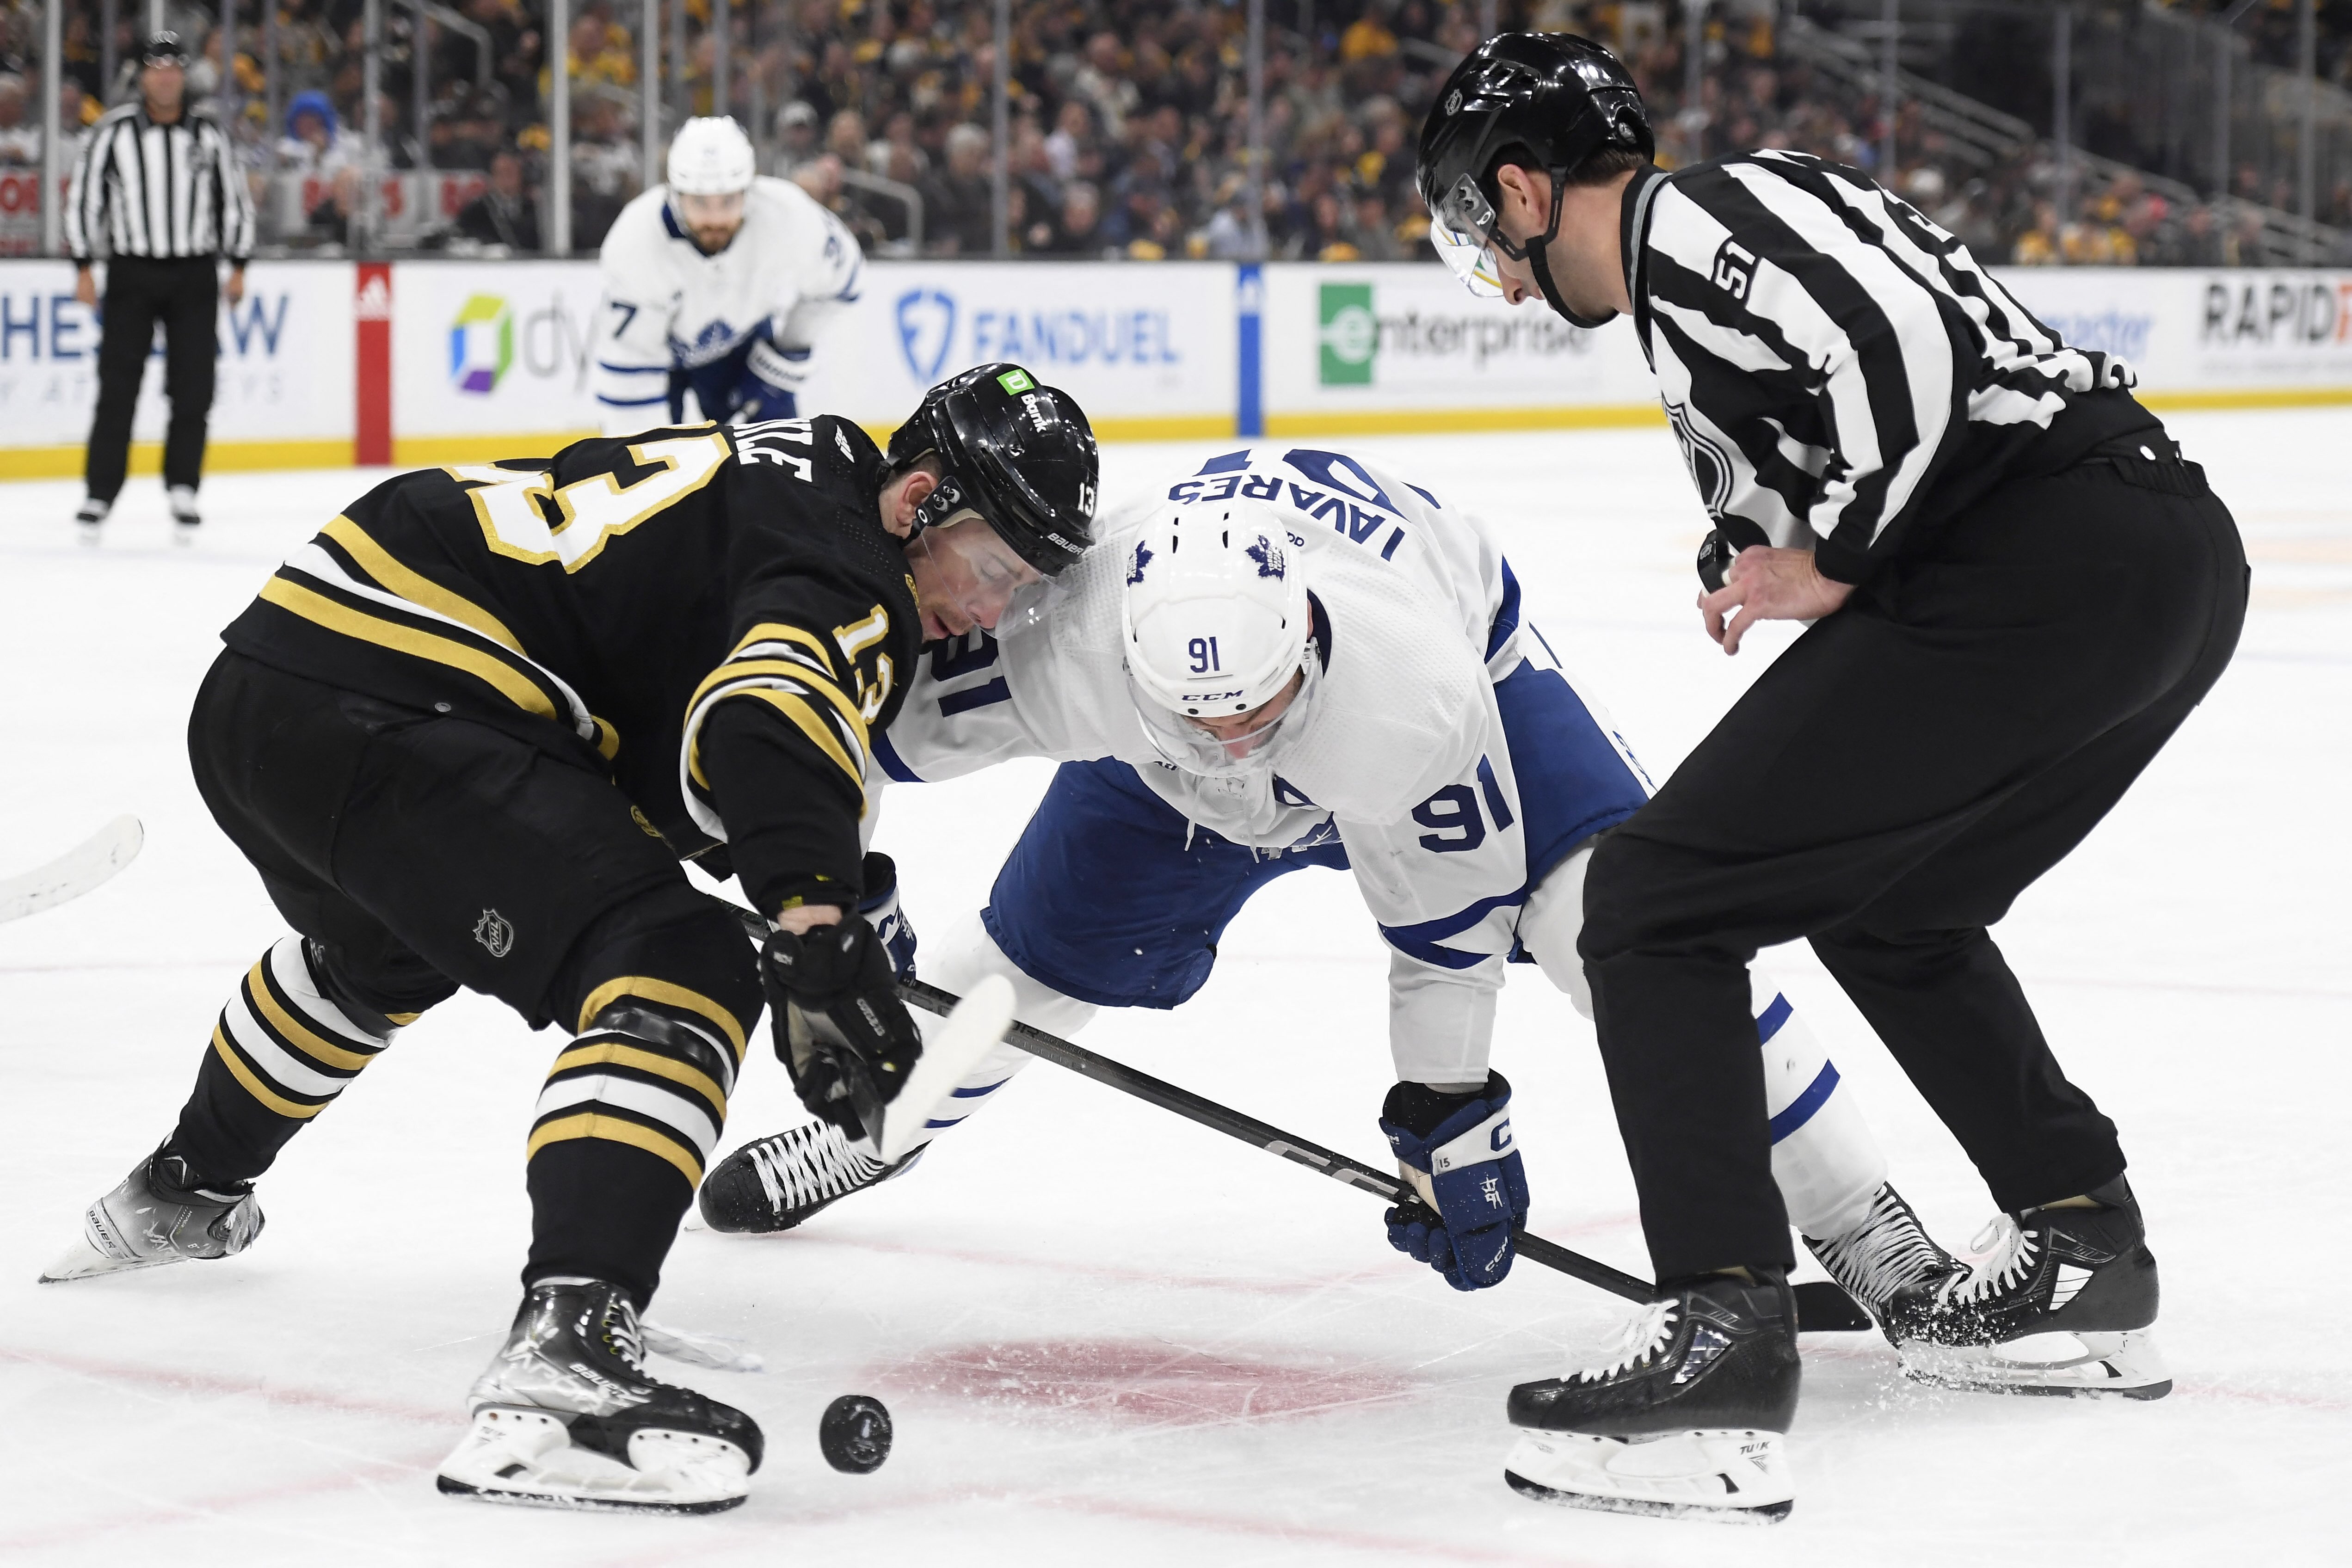 NHL Playoff Daily: Either way, tonight will bring pain in Boston or Toronto